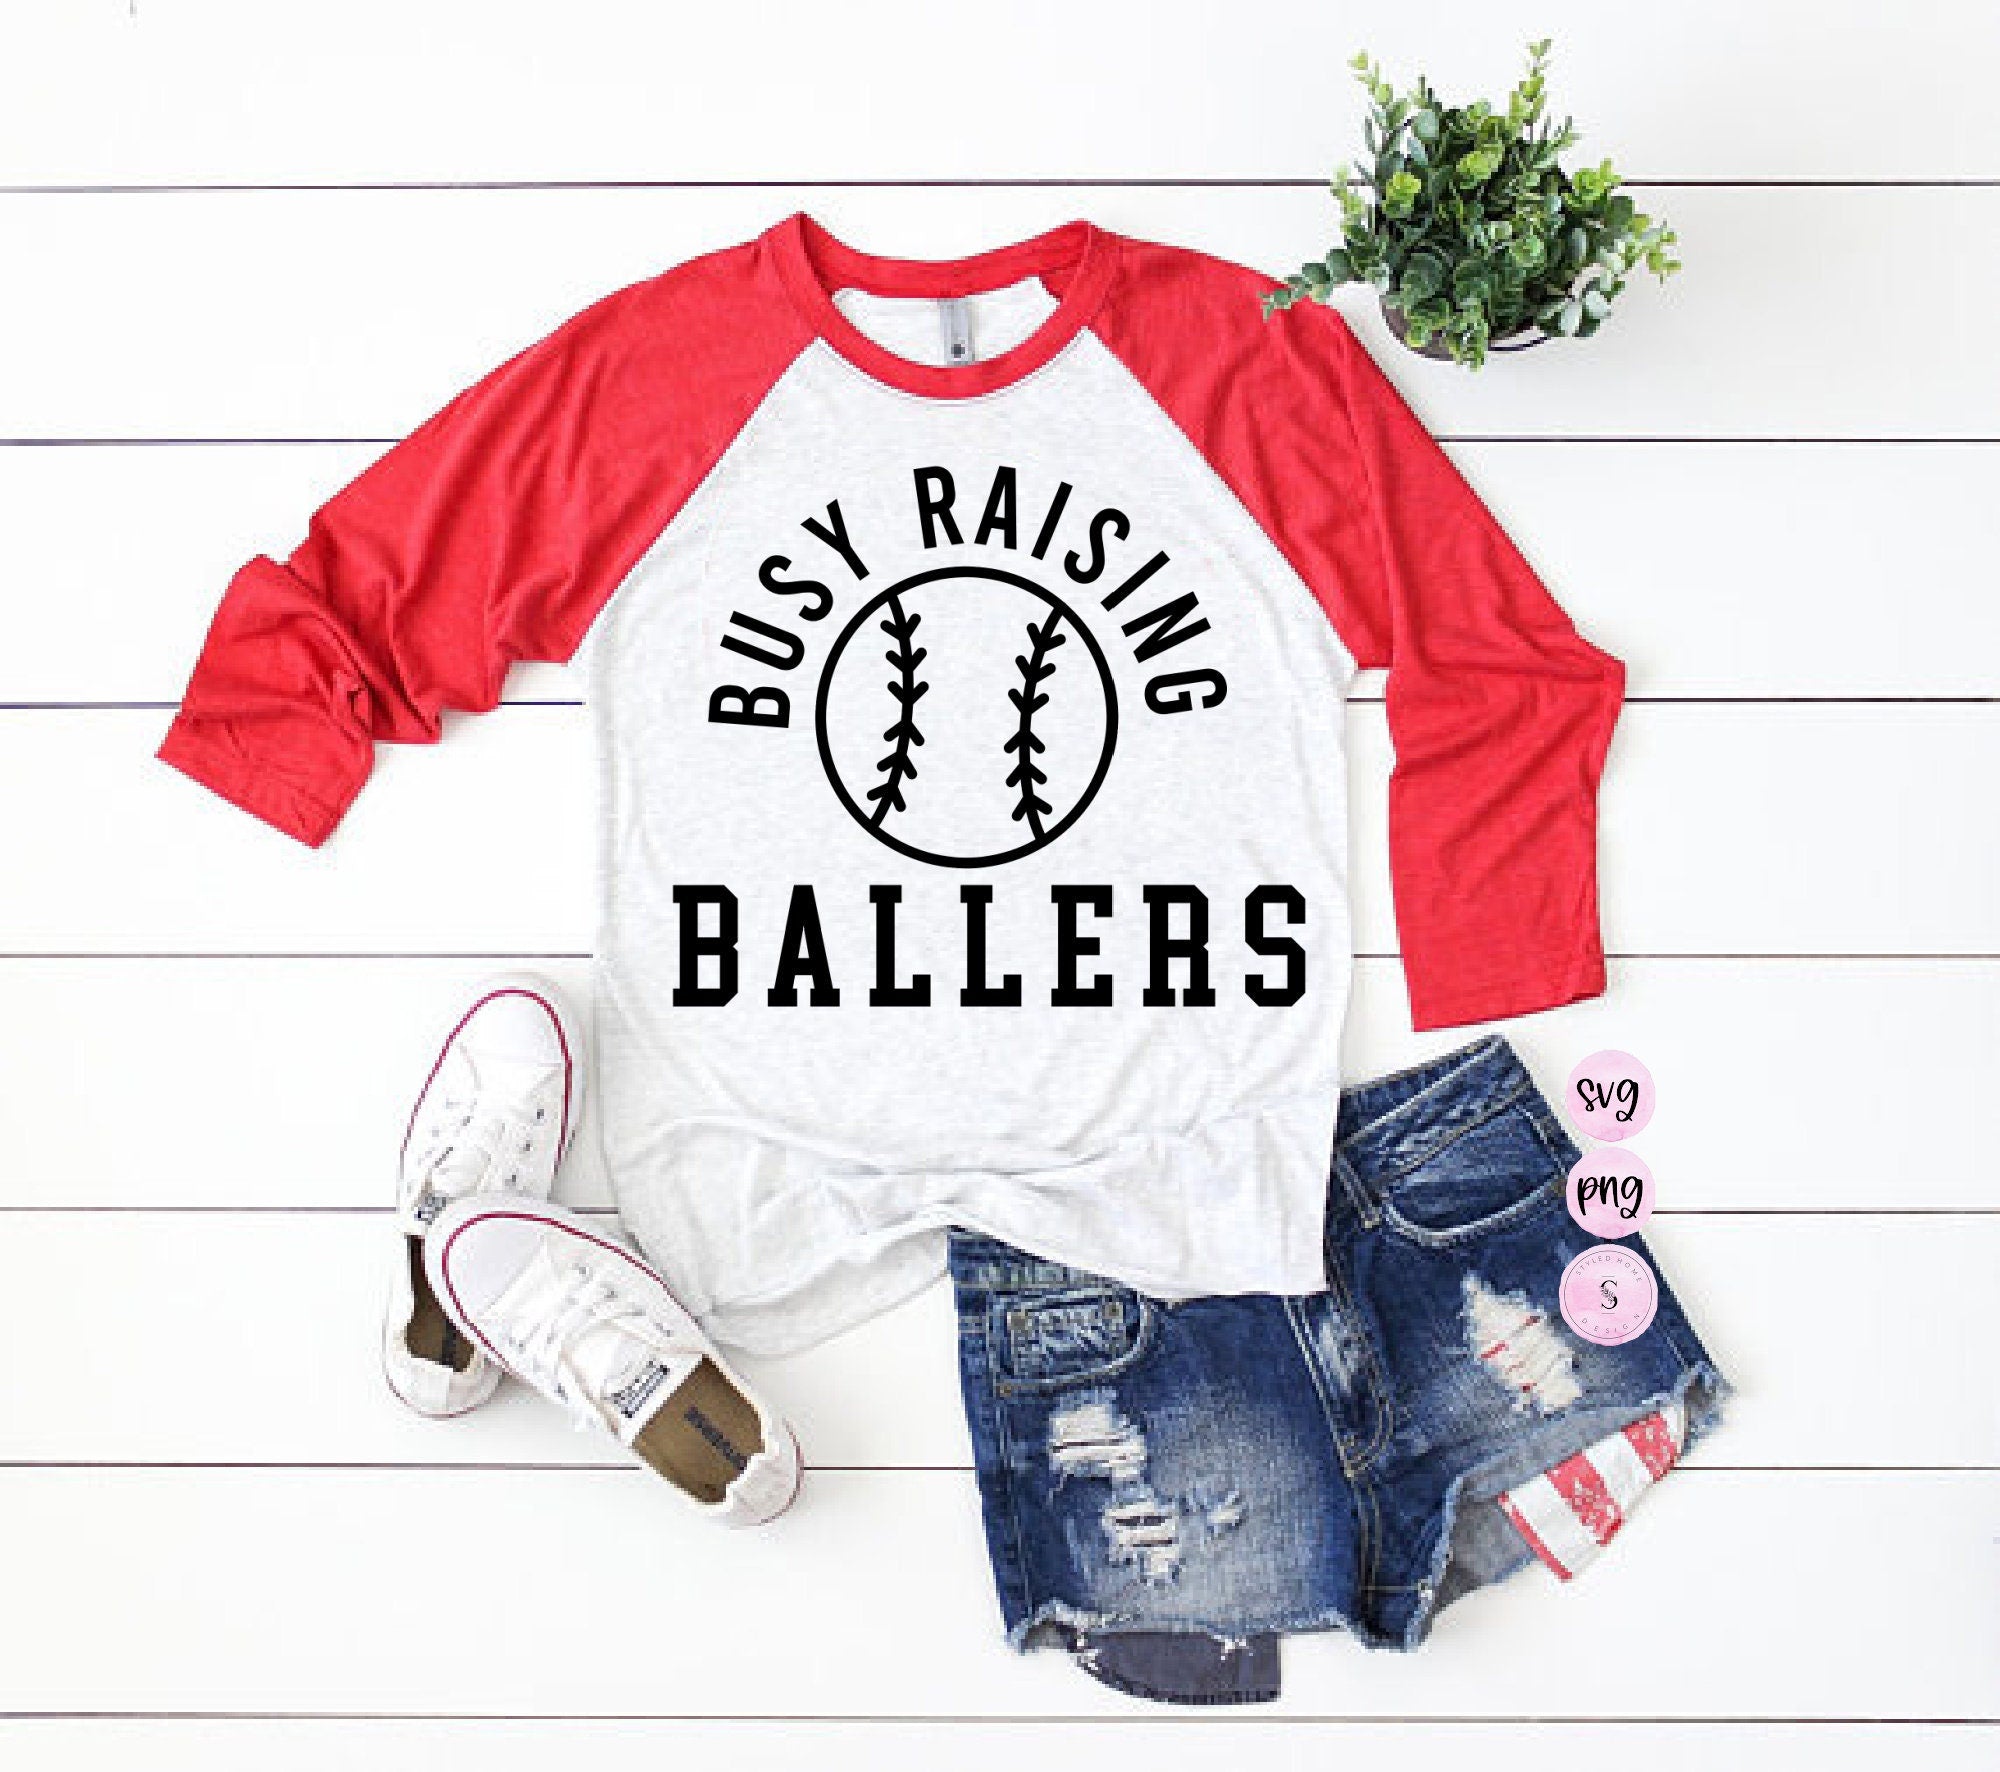 Baseball Mama Svg, Busy Raising Ballers, Baseball Mom, Baseball Svg, Baseball Shirt, Grunge Svg Cut File for Cricut & Silhouette, Png